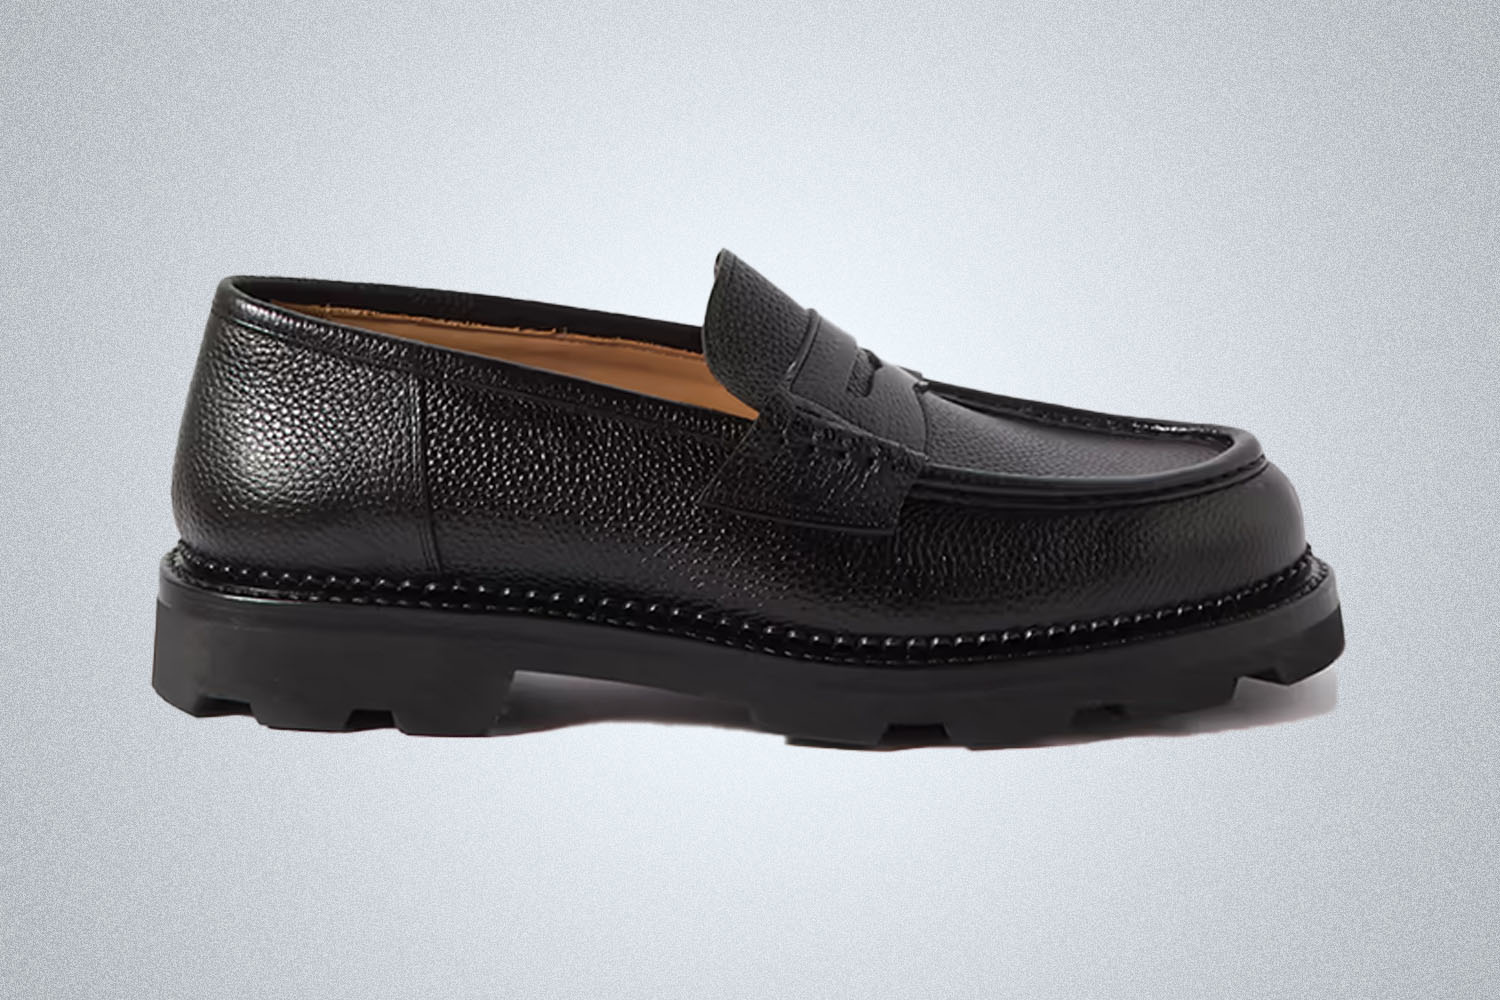 a pair of black Yuketen loafers on a grey background